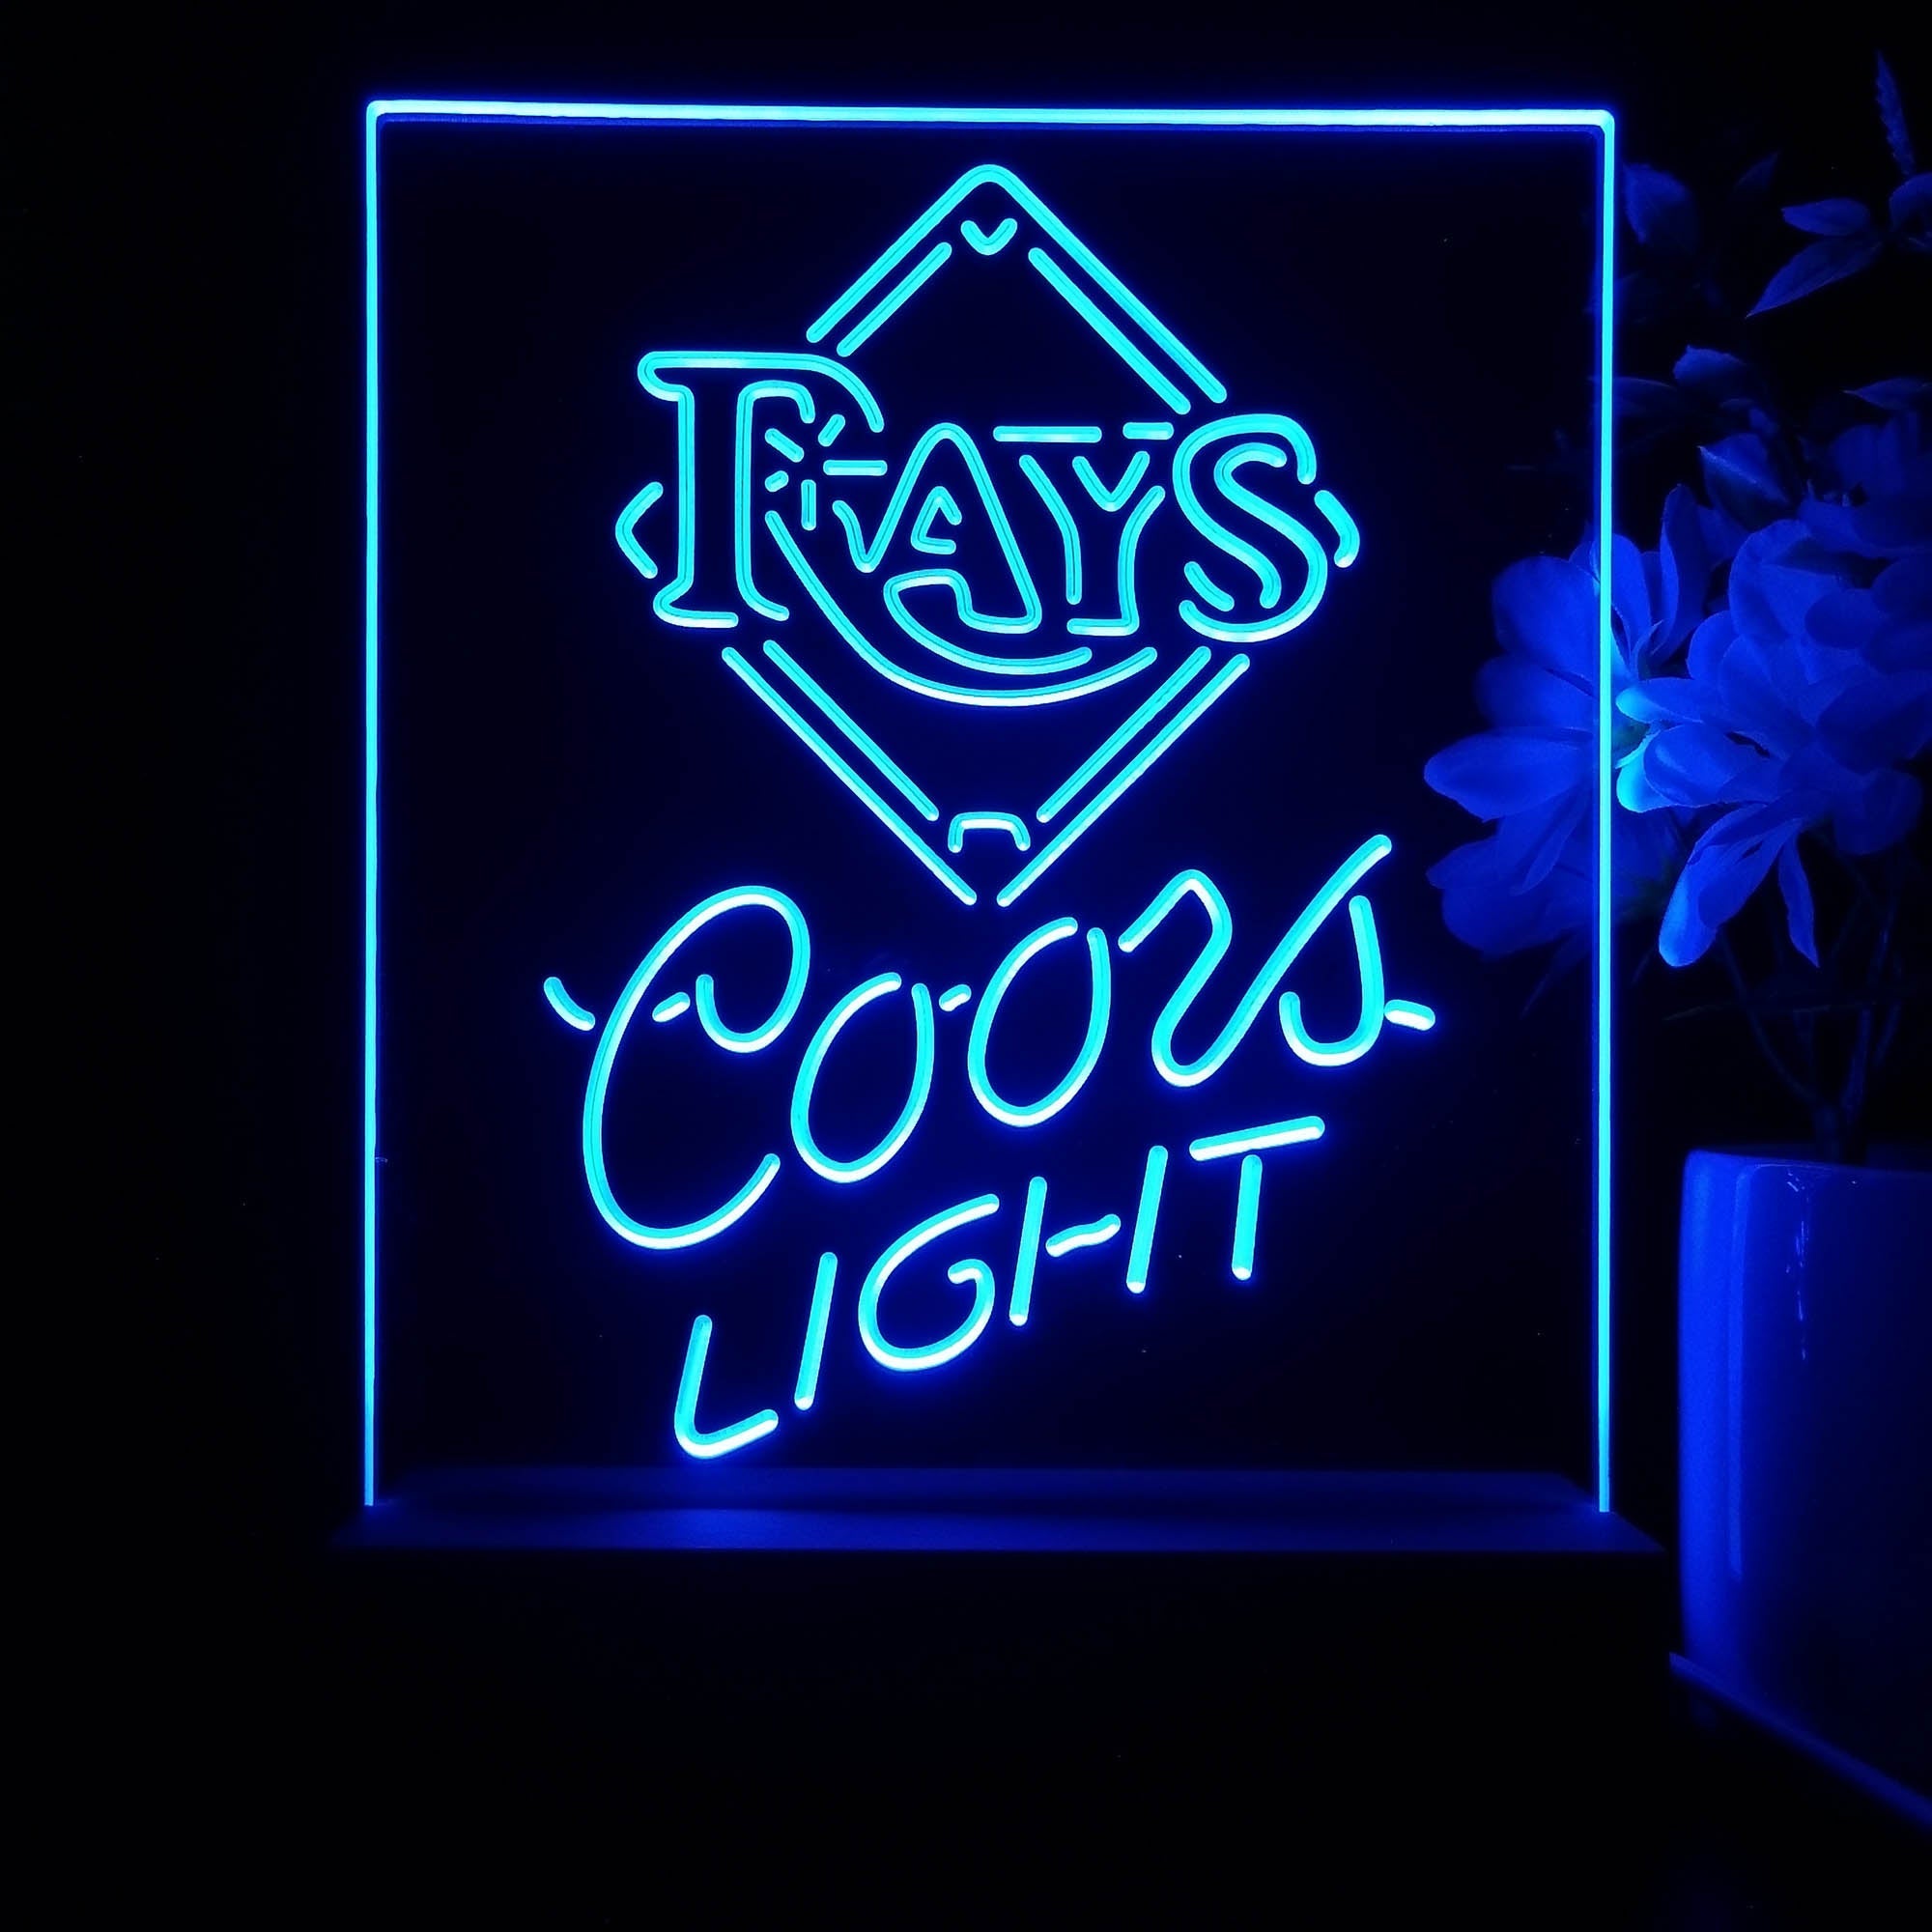 Tampa Bay Rays Coors Light Neon Sign Pub Bar Lamp